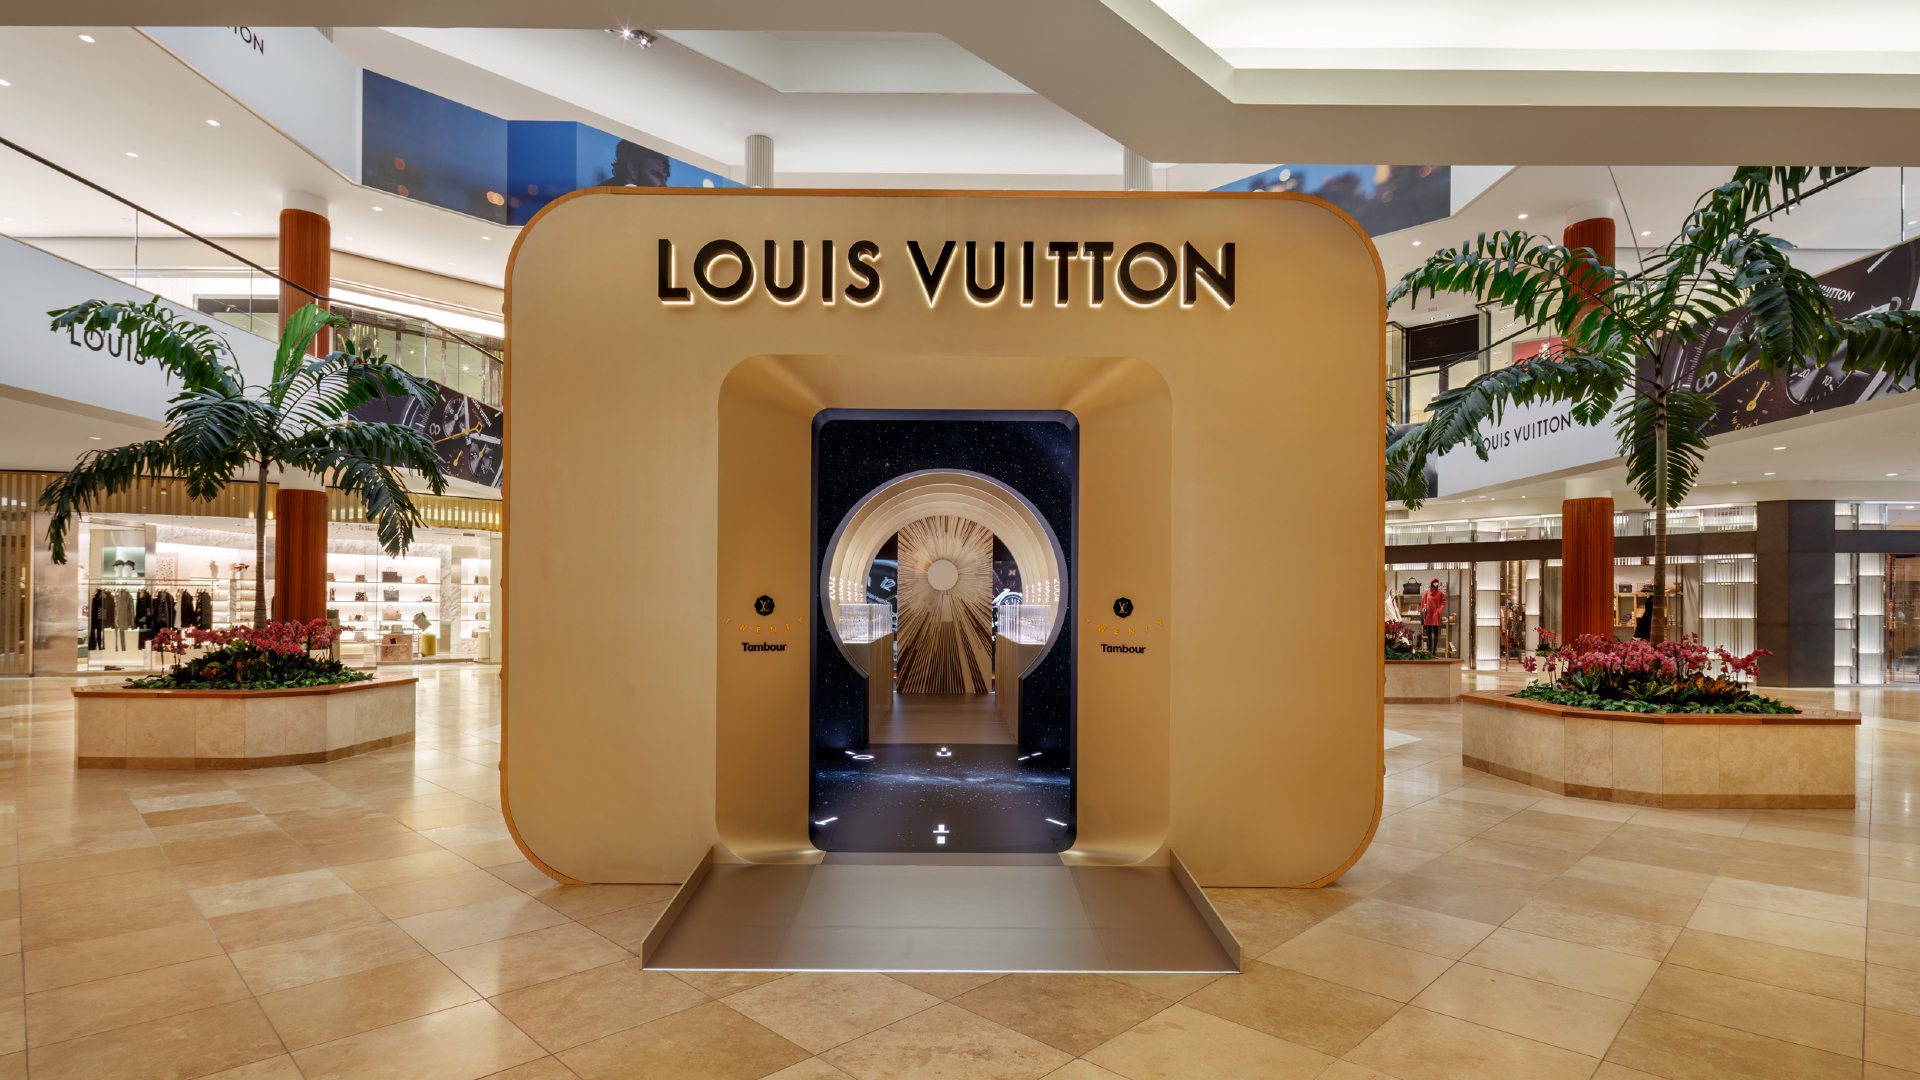 Retail Louis Vuitton popup selling old and new stock in a cool way